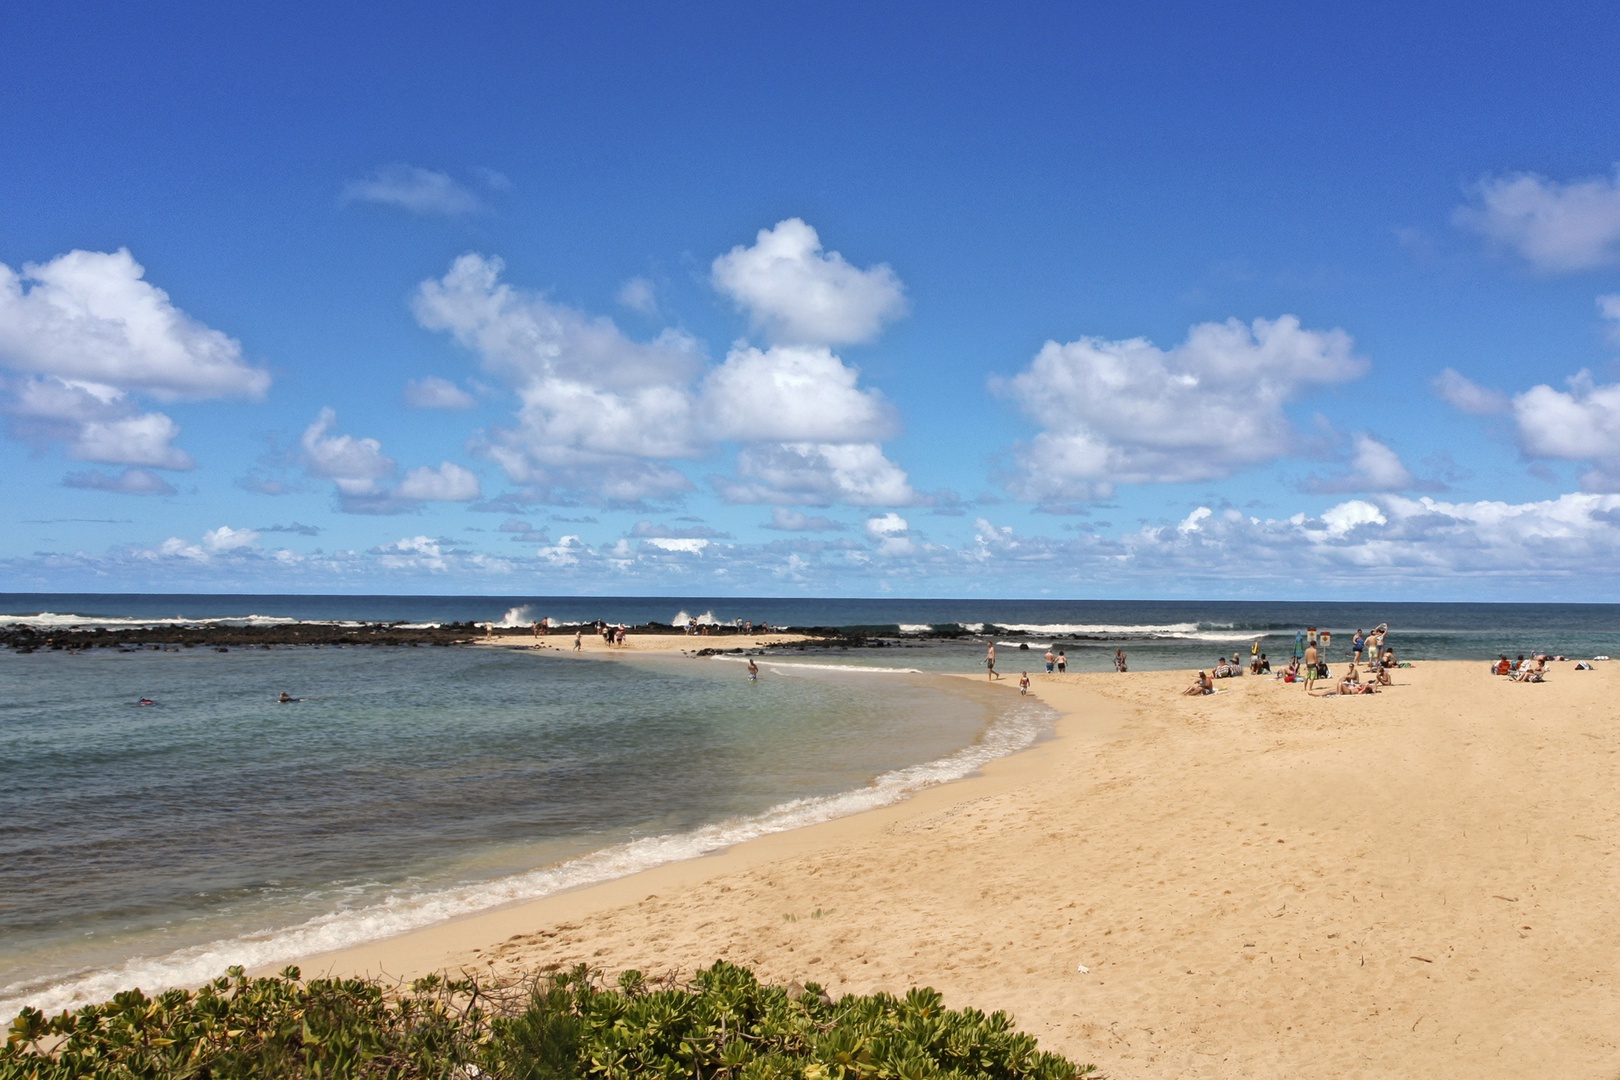 Koloa Vacation Rentals, Waikomo Streams 203 - Poipu Beach, a pristine coastal haven where turquoise waters meet golden sands, inviting you to relax and soak in the beauty of Kauai